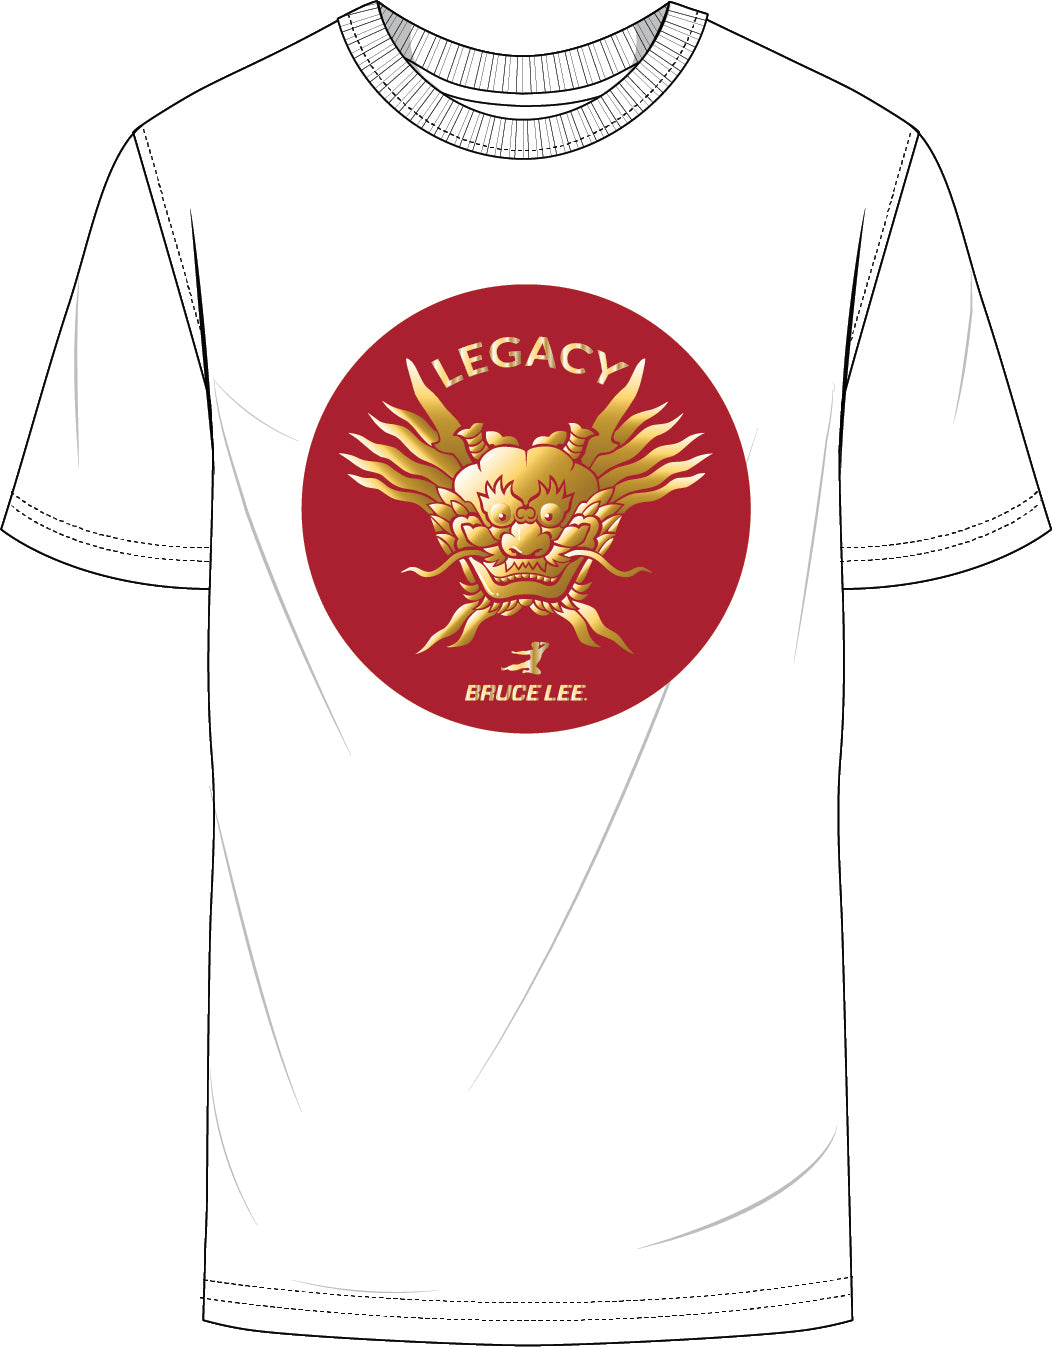 MITCHELL & NESS BRANDED BRUCE LEE LEGACY TEE COLLAB (WHIT)